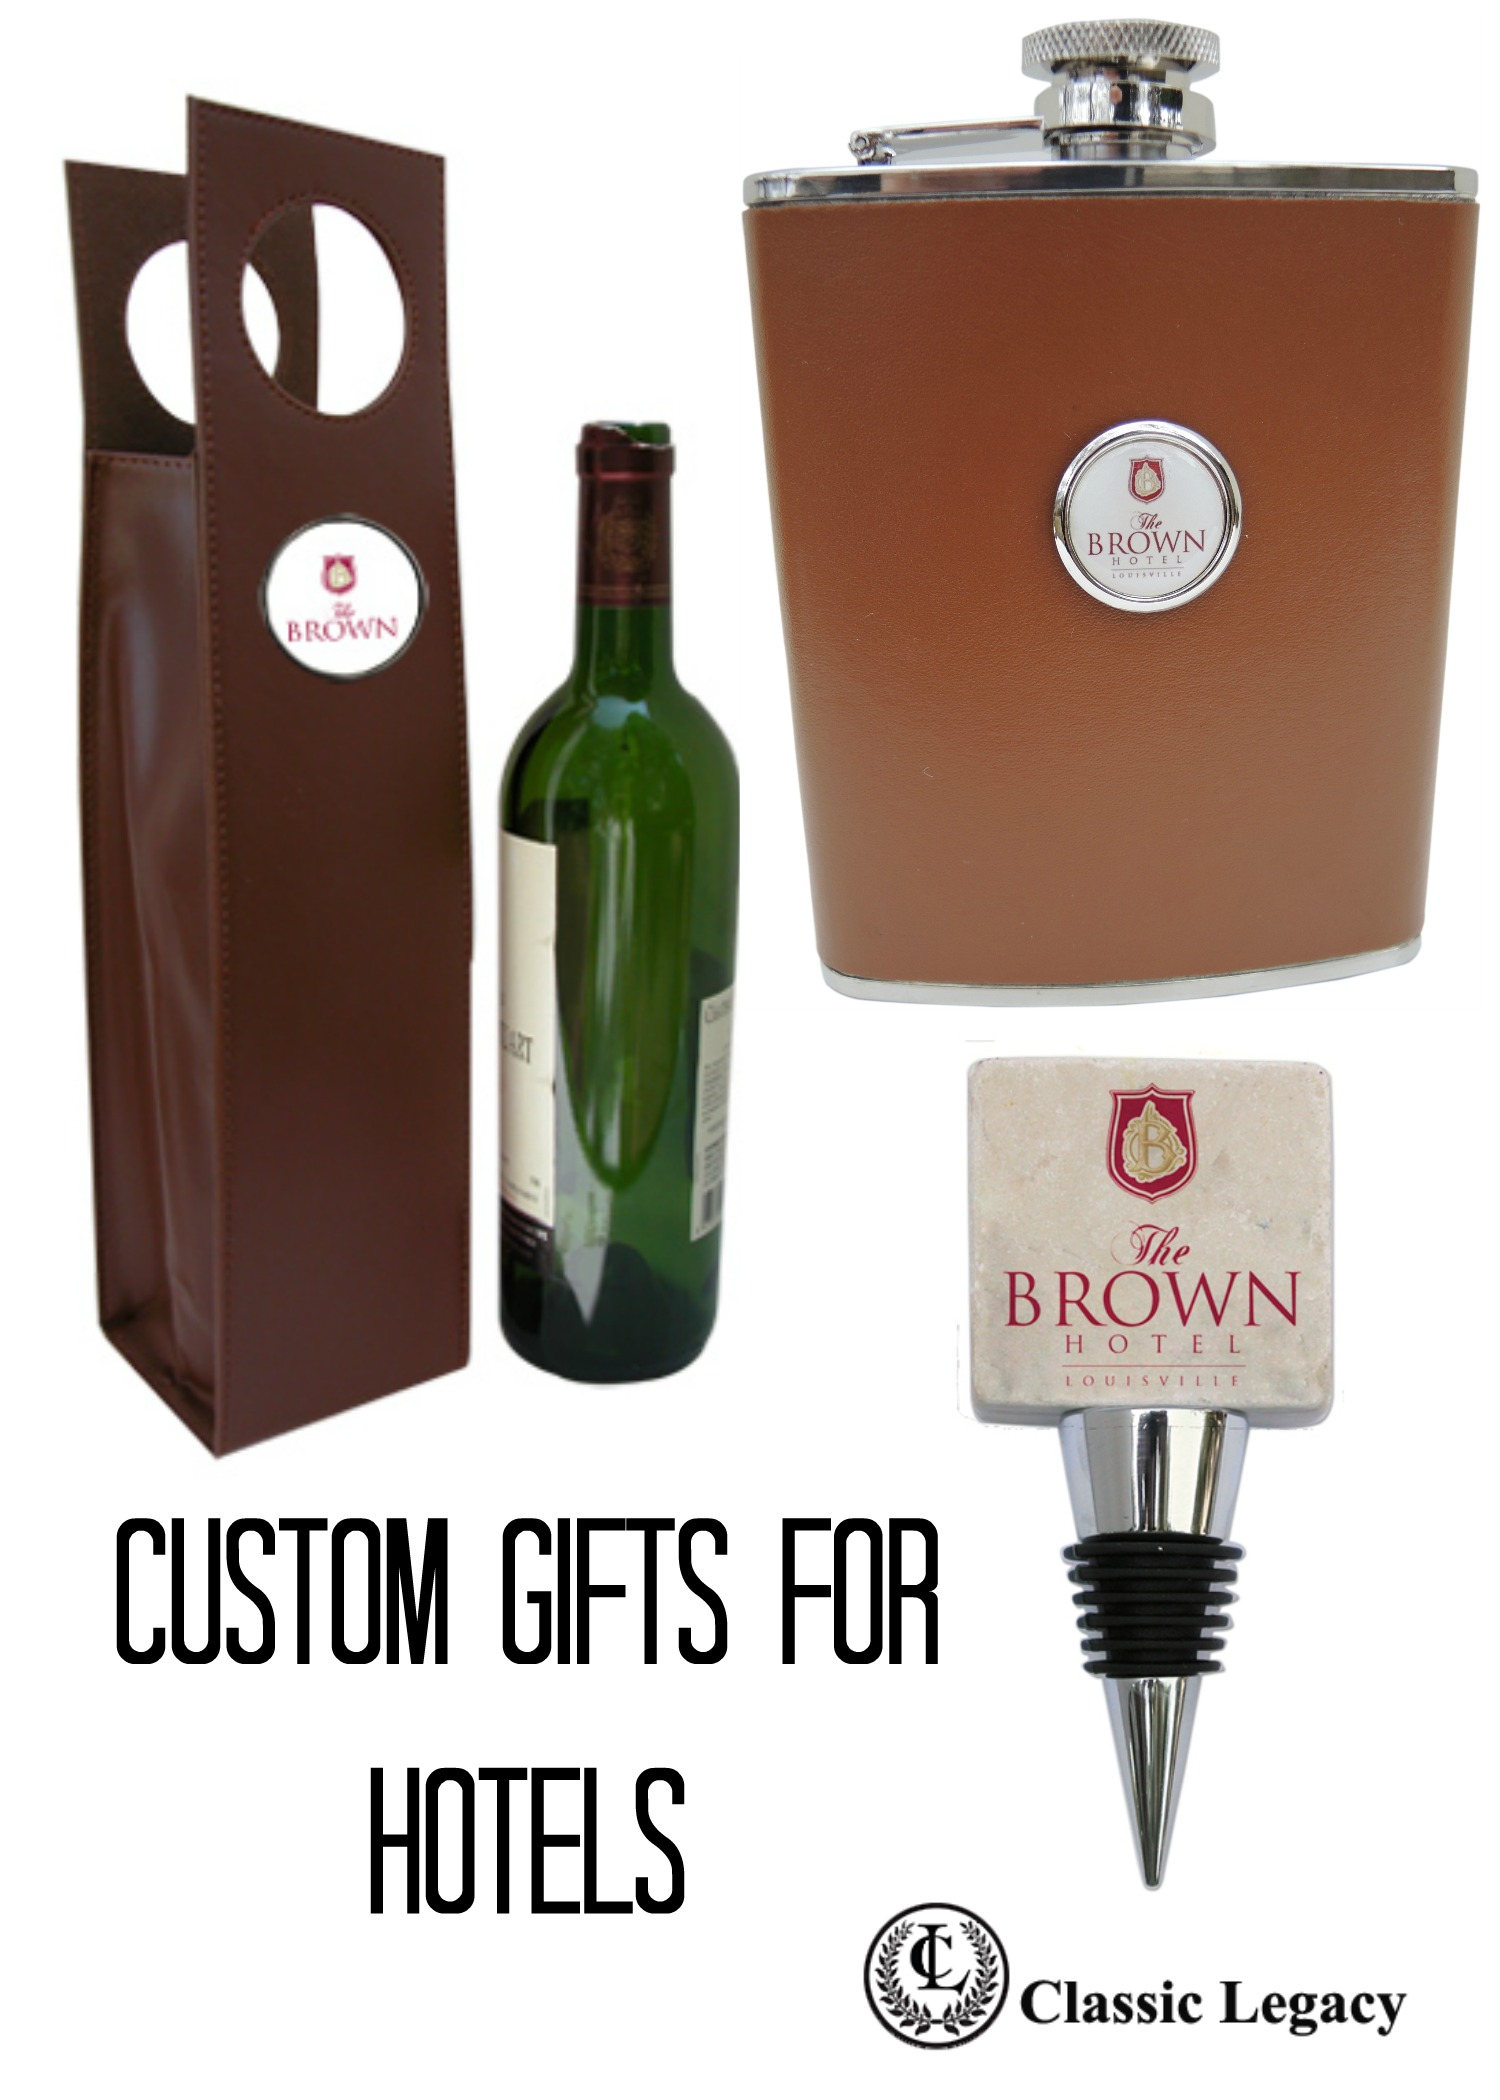 Custom Gifts by Classic Legacy for The Brown Hotel